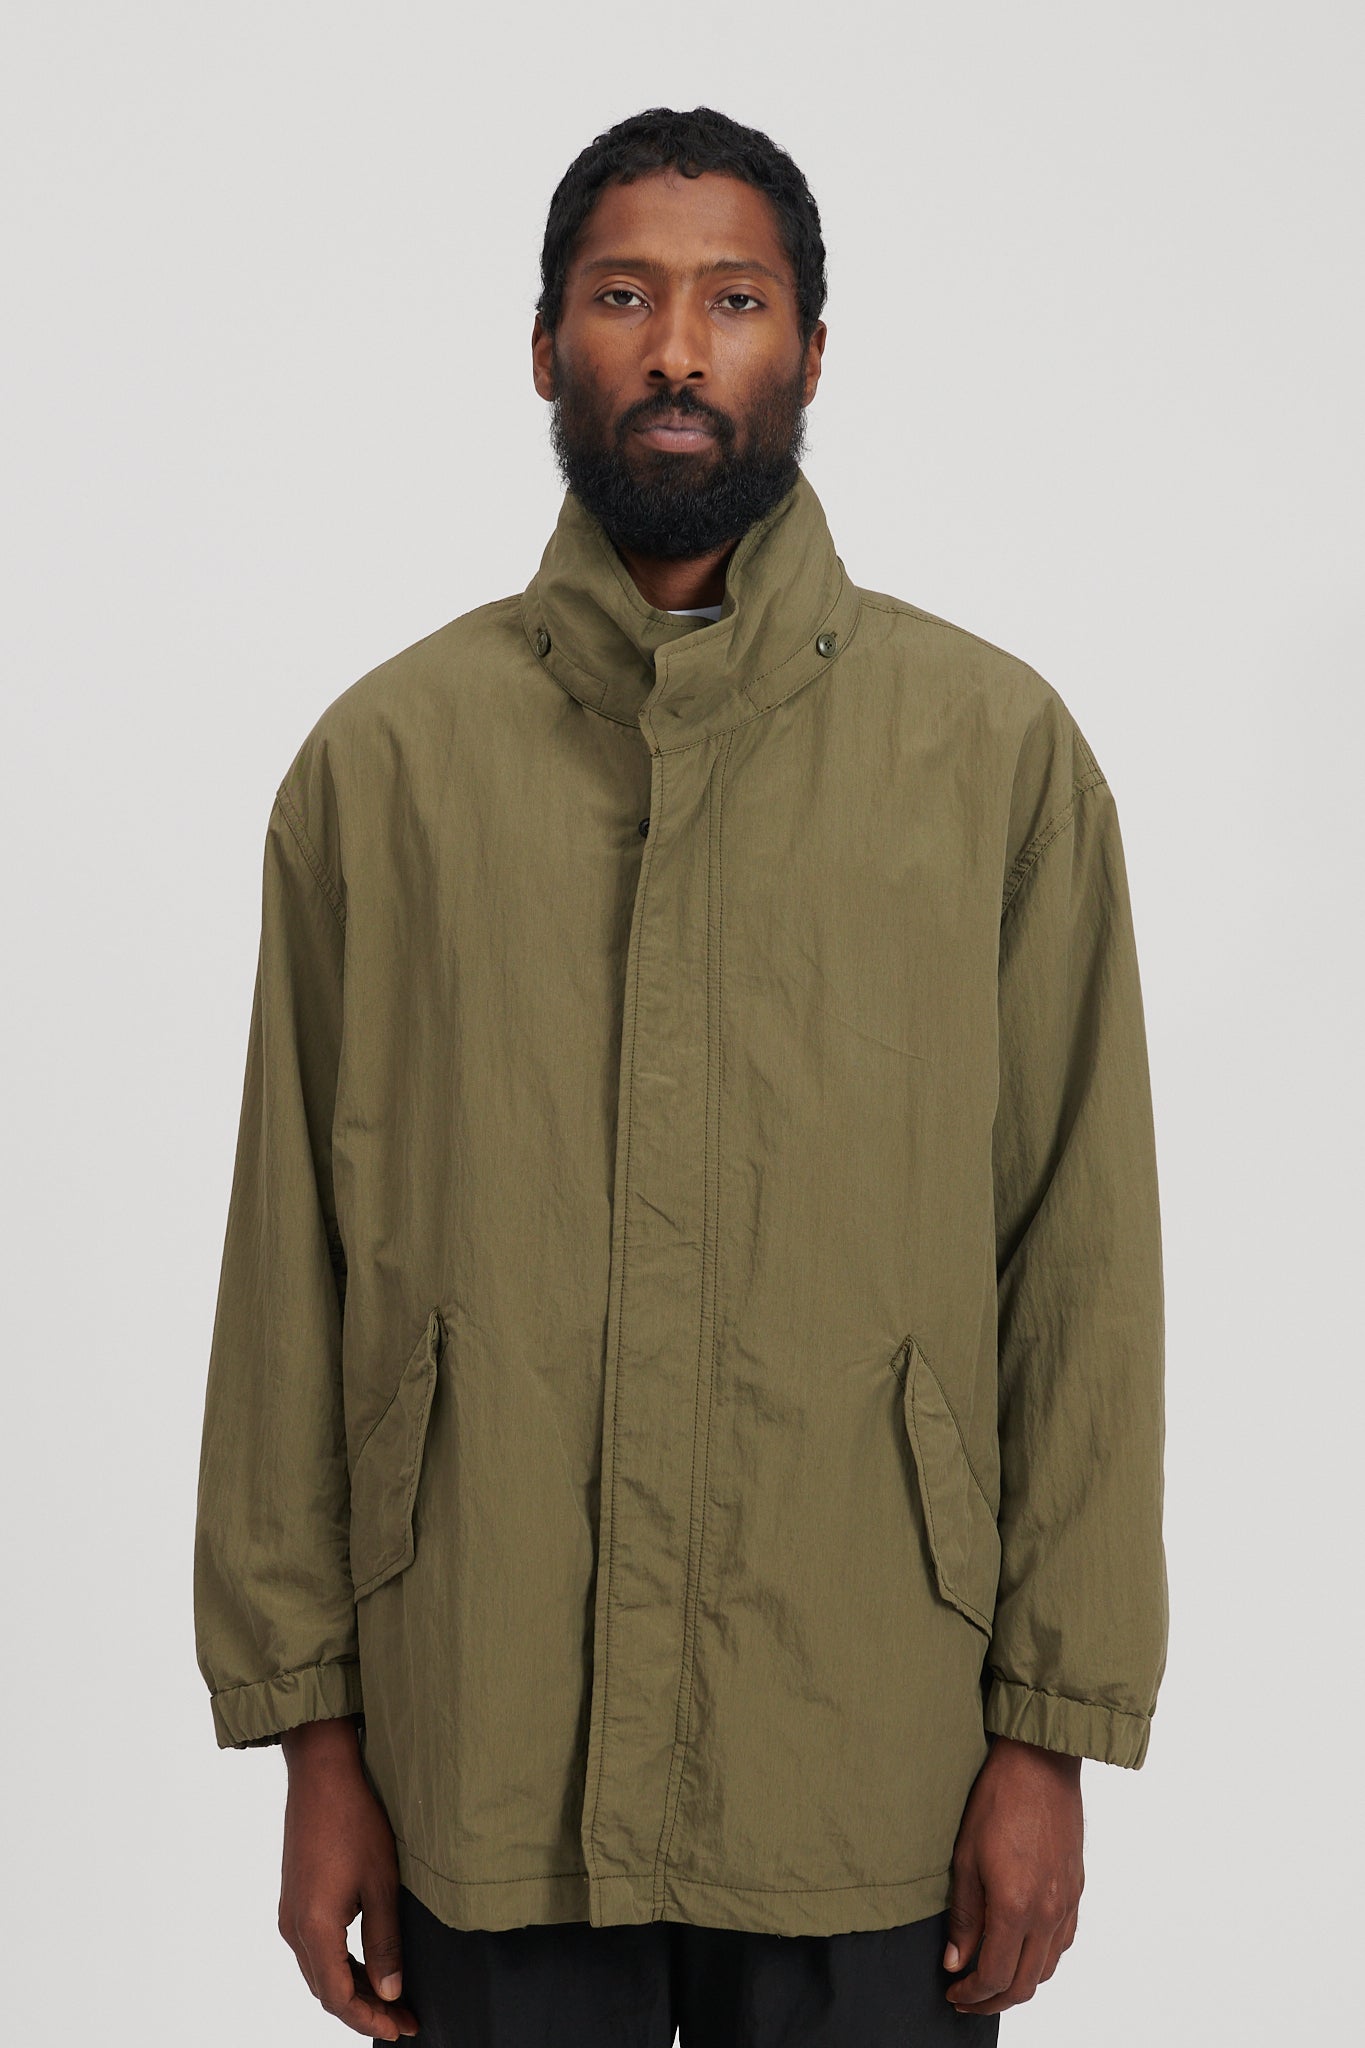 M-51 Type Nylon Cotton Jacket with Liner - Olive